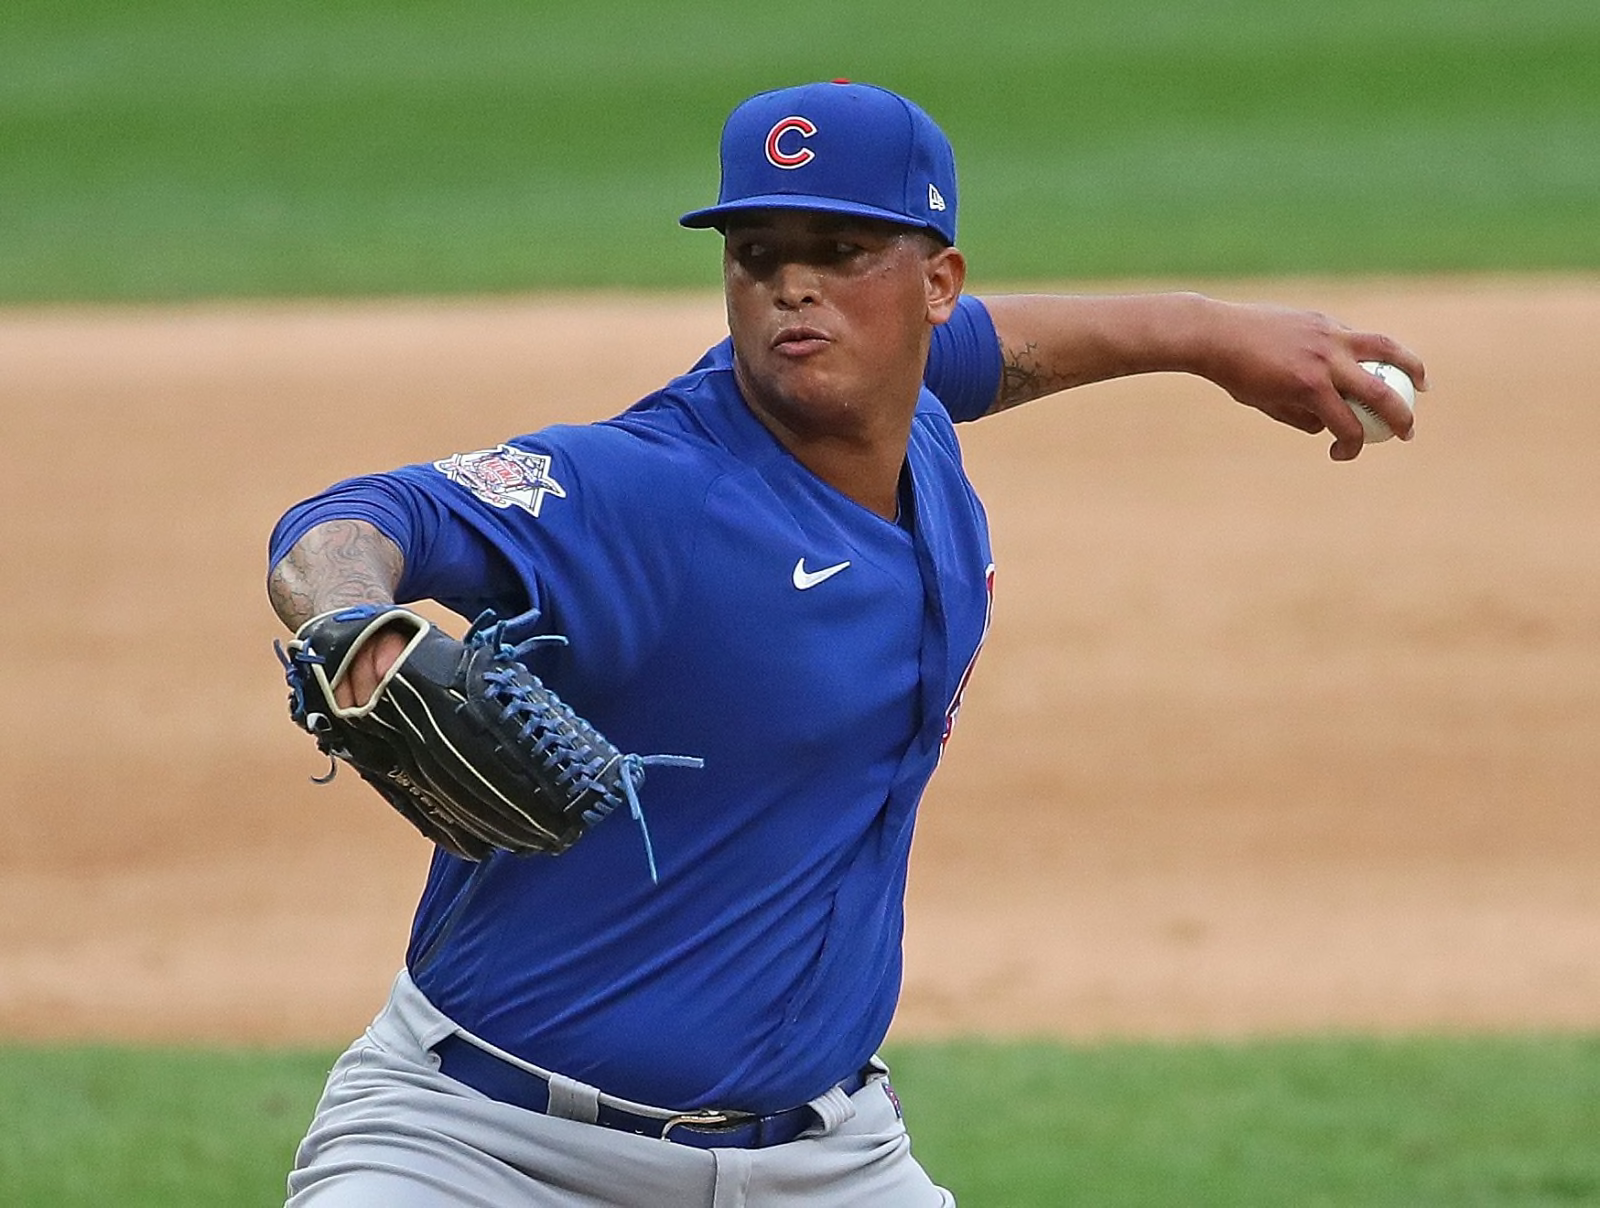 Ranking top 4 Chicago Cubs prospects who could make an impact soon Page 2